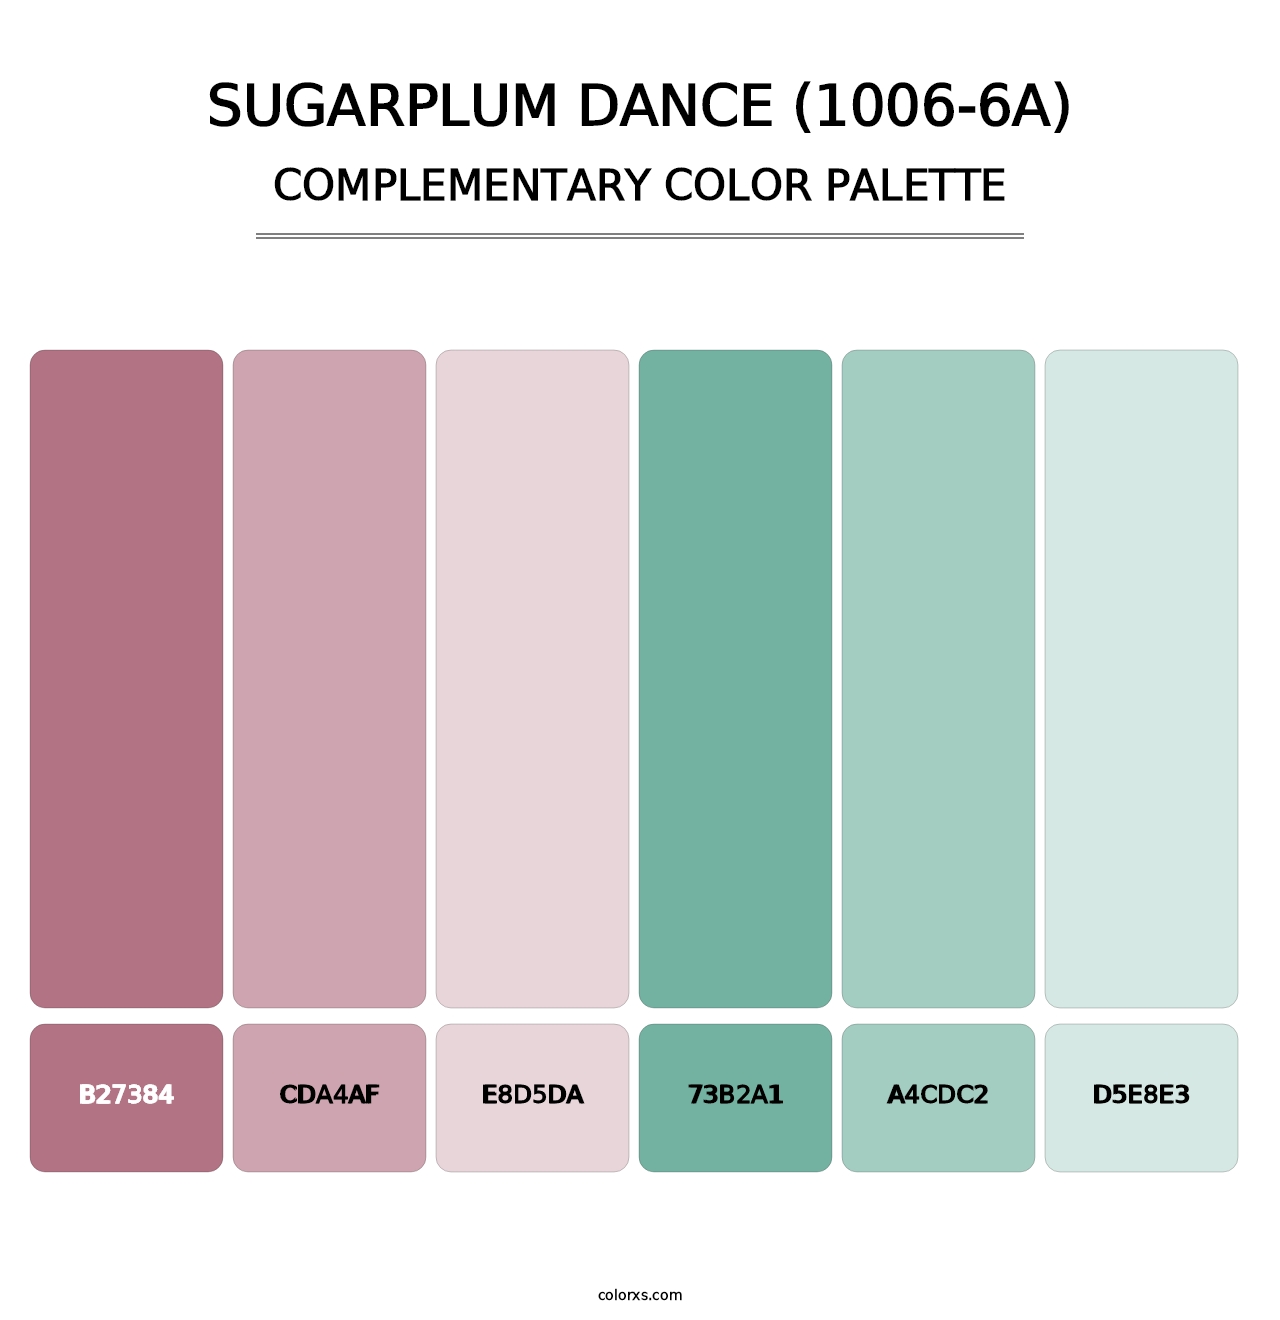 Sugarplum Dance (1006-6A) - Complementary Color Palette